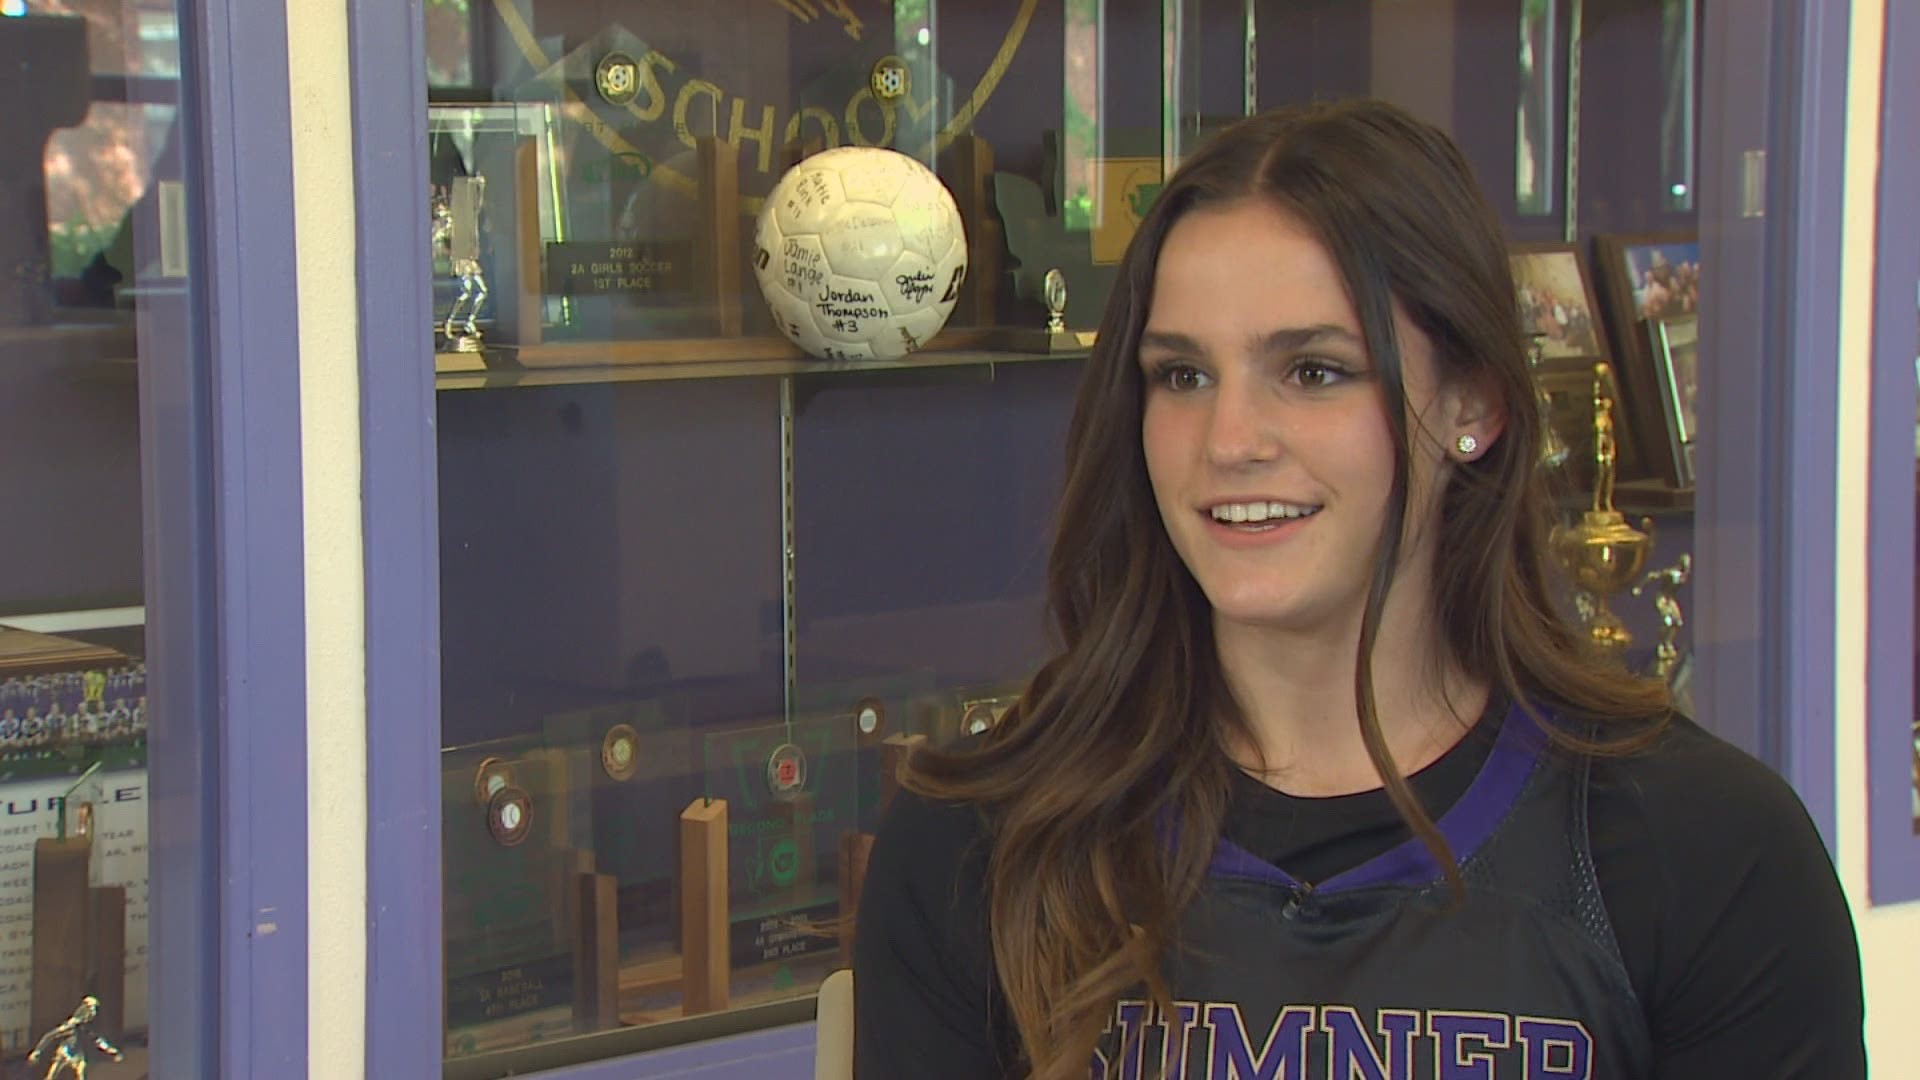 The Sumner girls' basketball team has a solid chance to win their first 4A SPSL title in over a decade, and one of the team’s stars is just happy to be back.